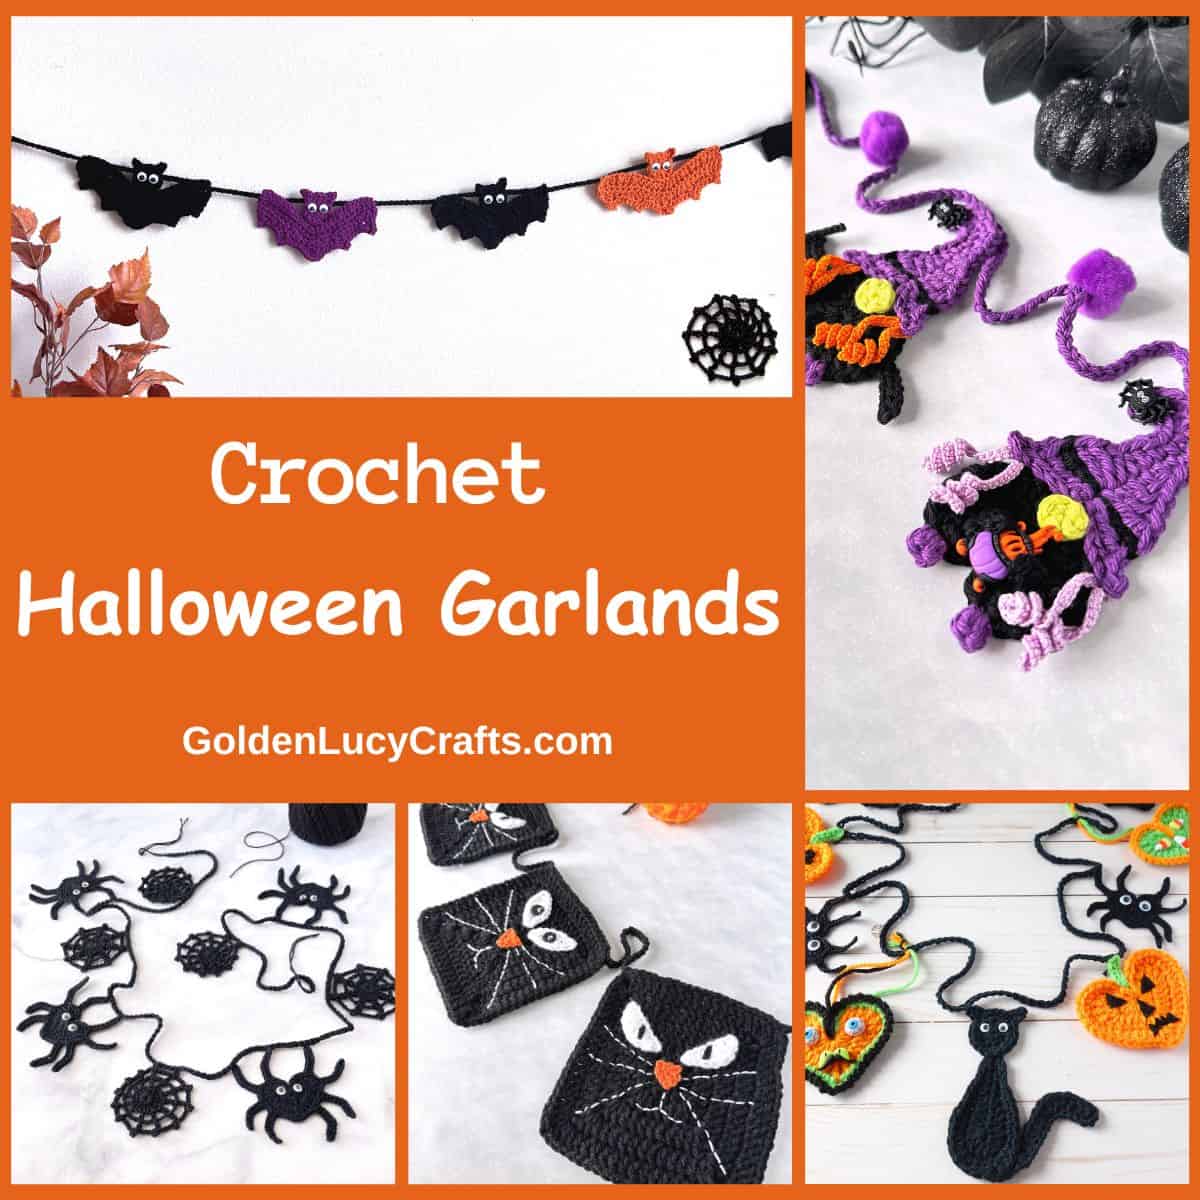 Photo collage of crocheted Halloween garlands, text saying crochet Halloween garlands, goldenlucycrafts dot com.